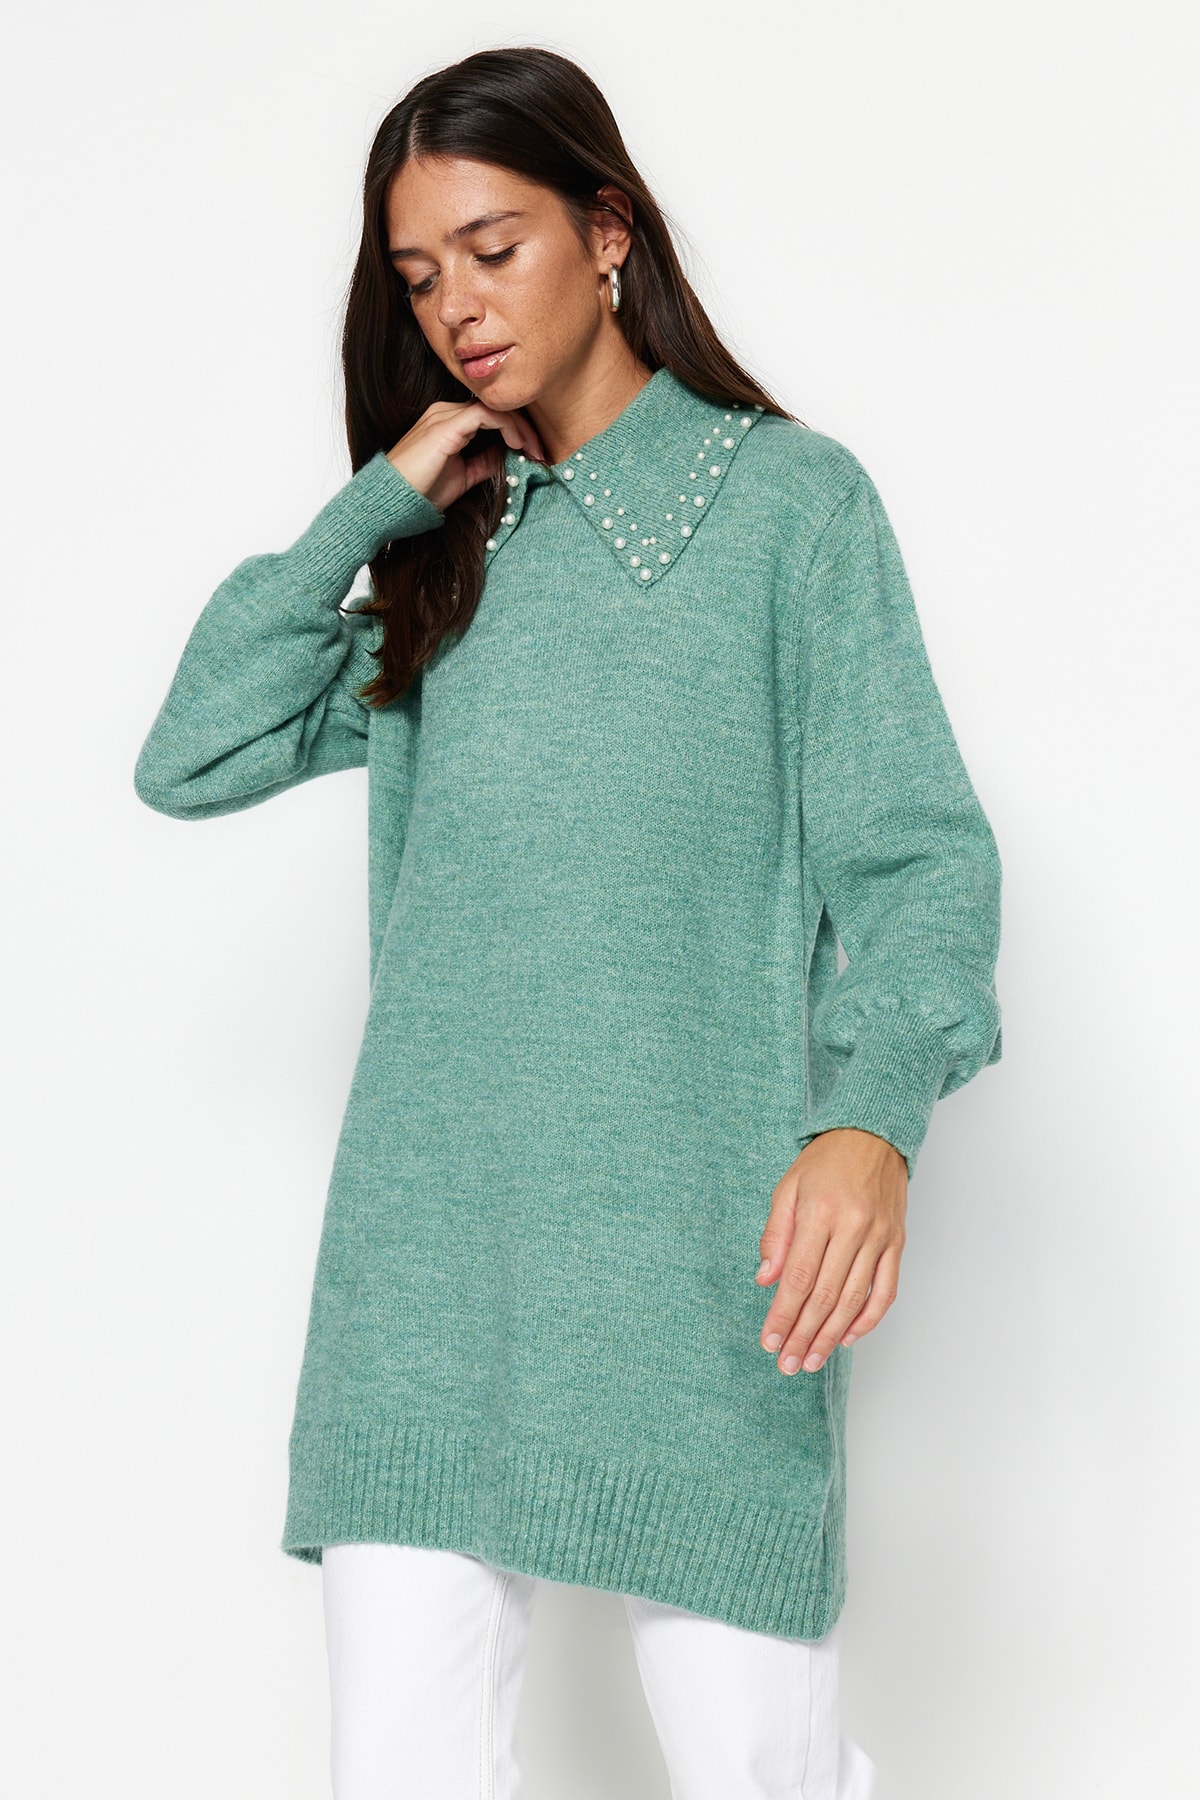 Trendyol Turquoise Baby Collar and Pearls Soft Knitwear Sweater